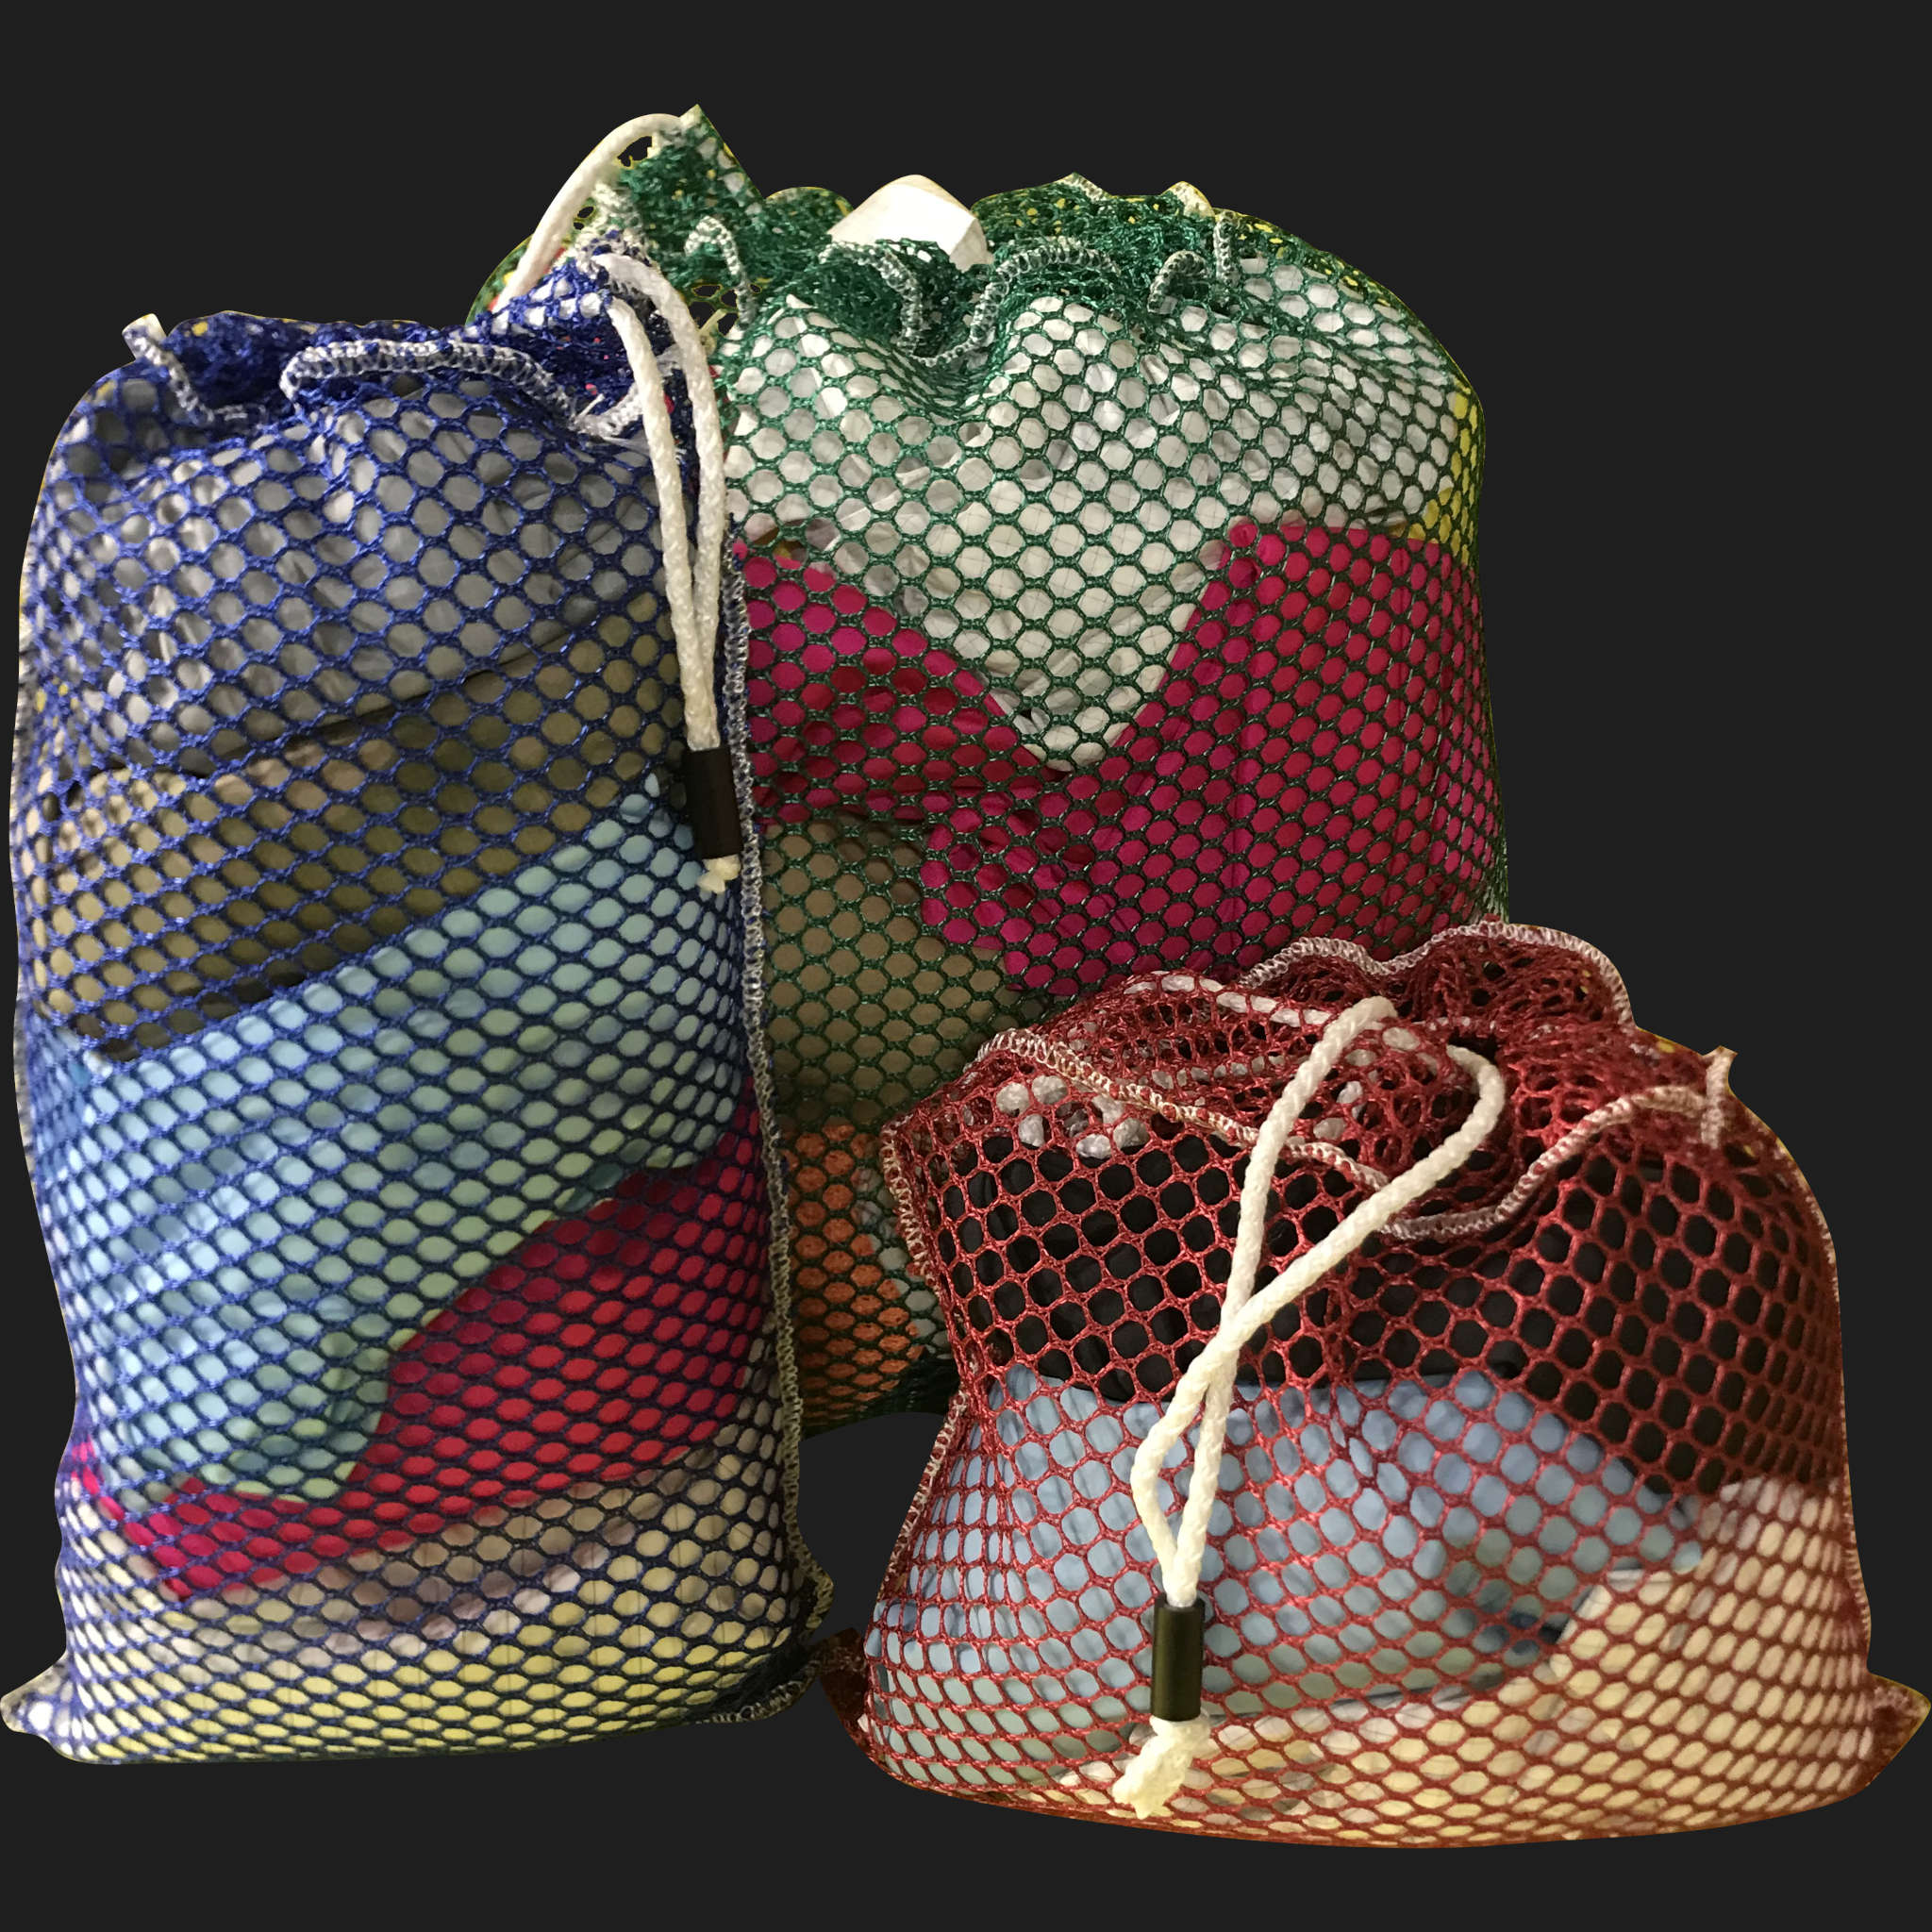 32" x 44" Customized Mesh-Net-Laundry Bags Heavy Duty with Cord and barrellock closure